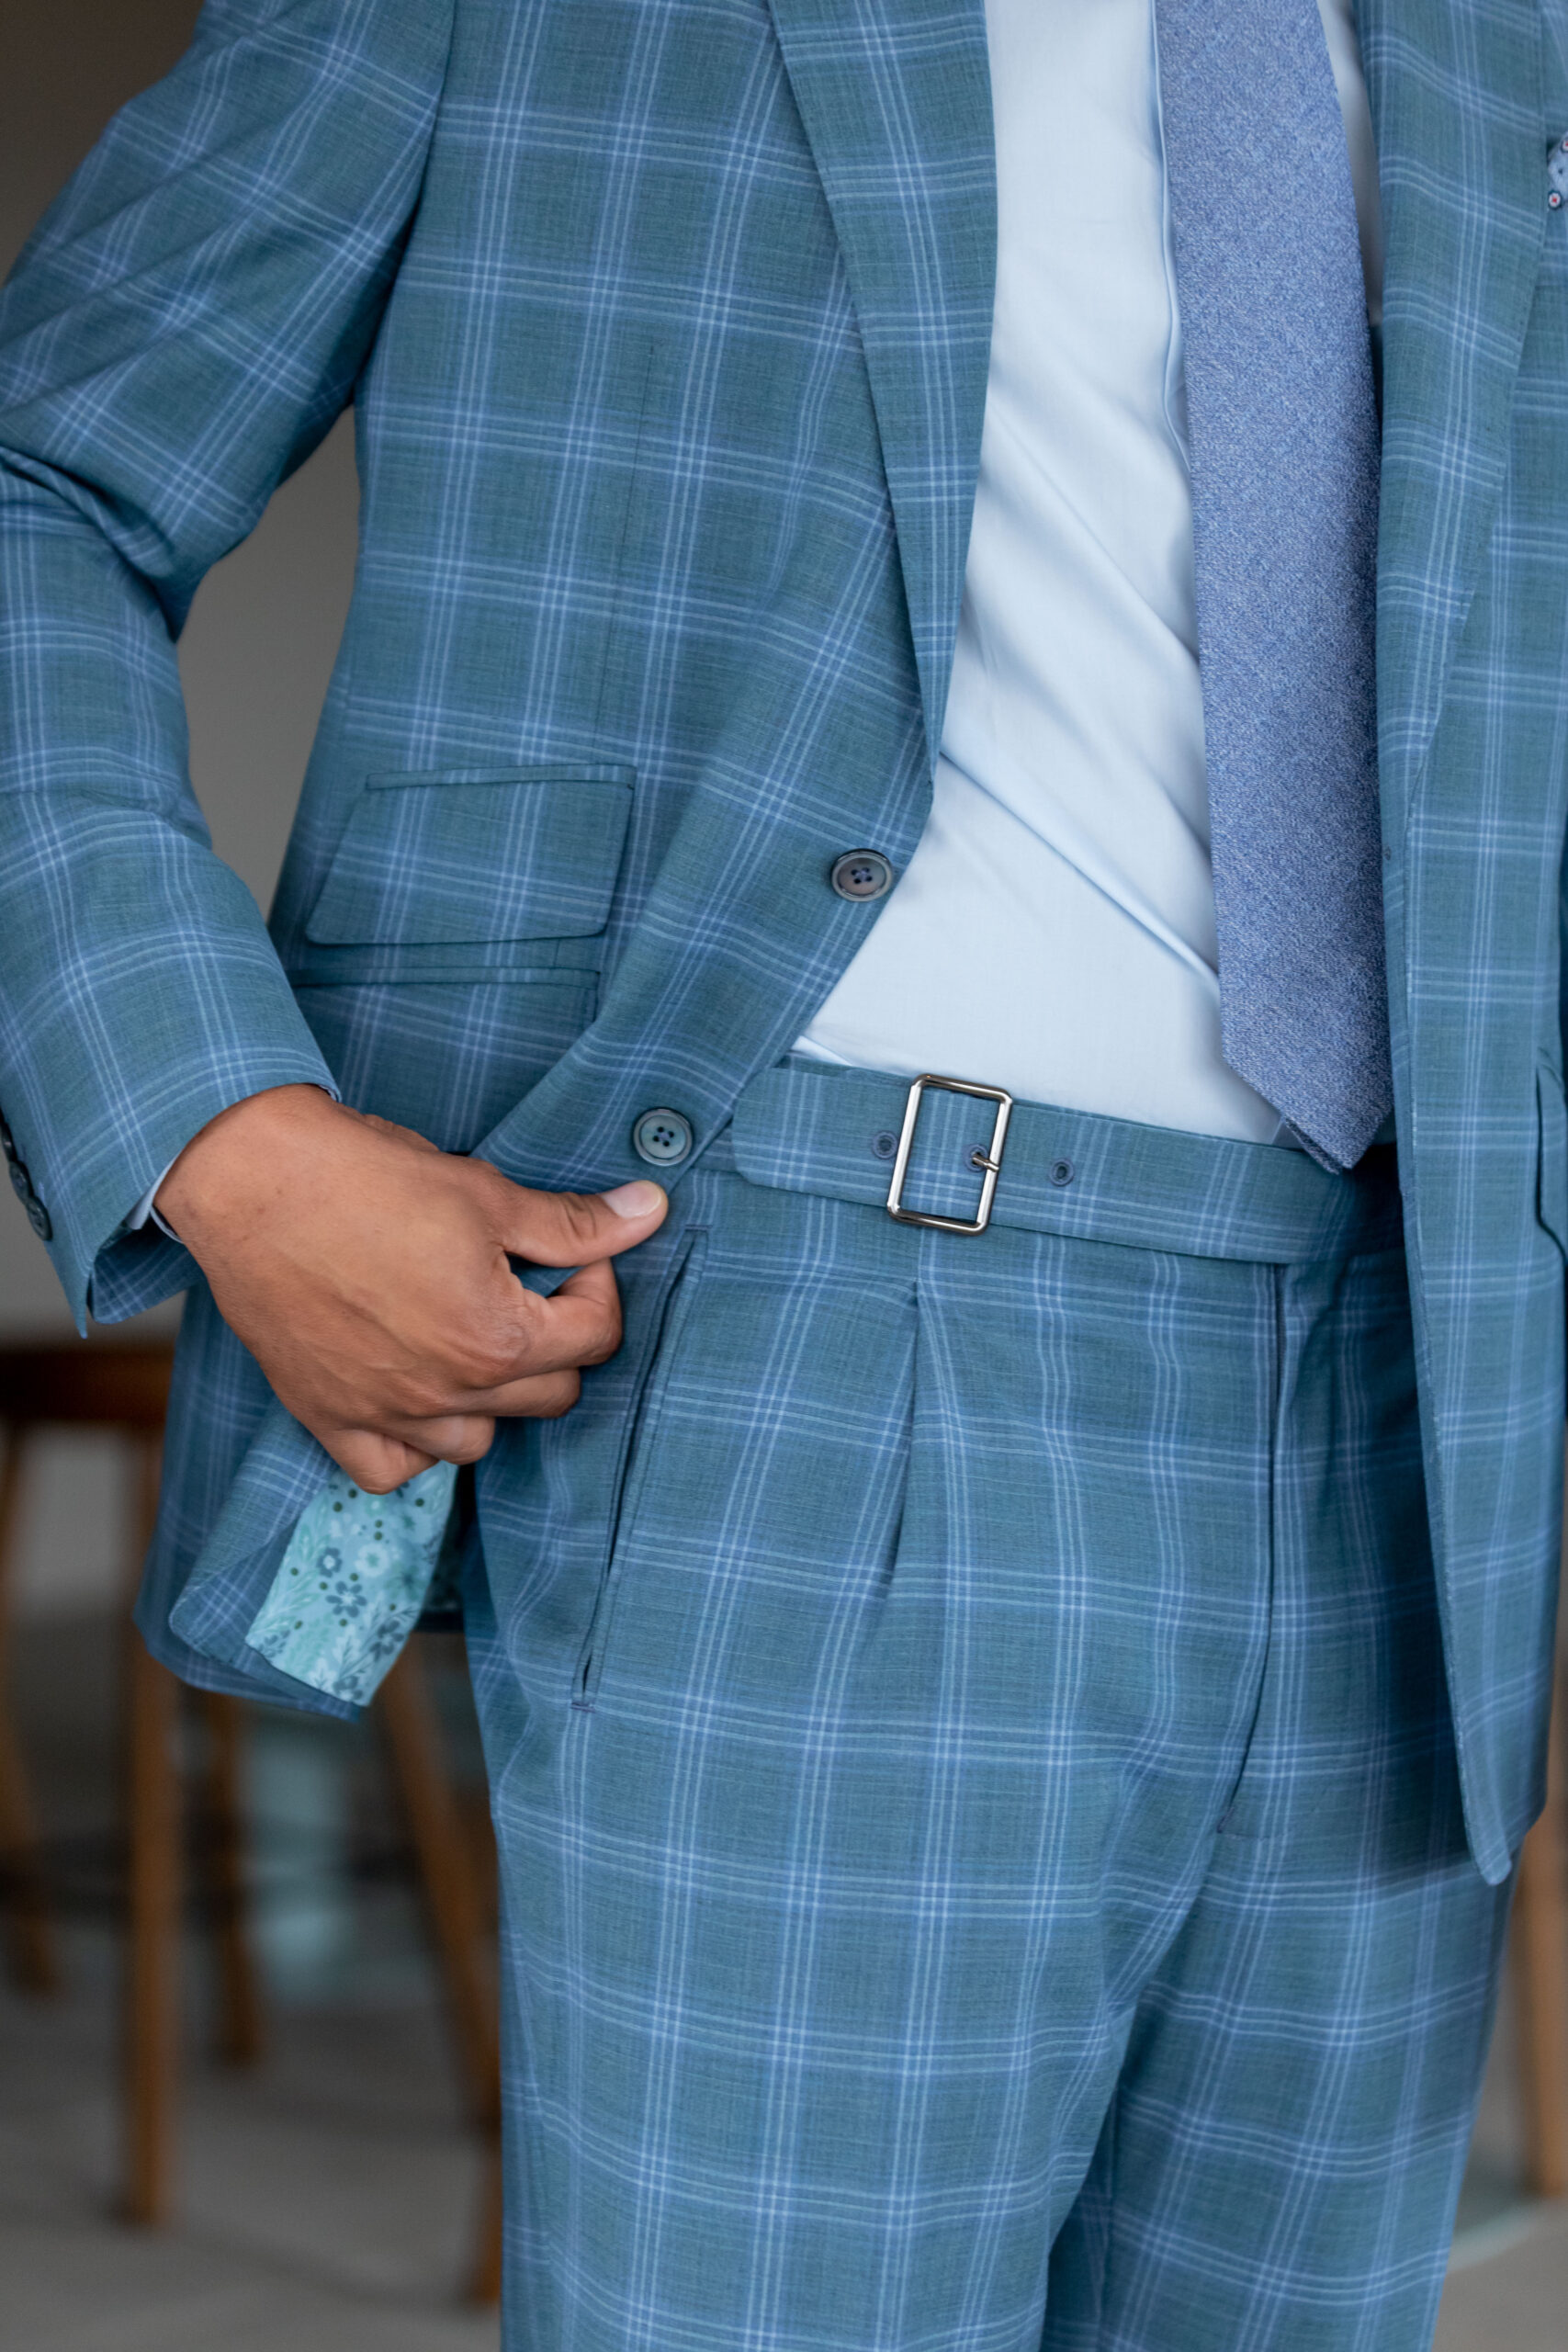 Spring Summer version of Super 130’s Wool Stretch custom made suit in a tropical weave Caribbean Blue Green Plaid color